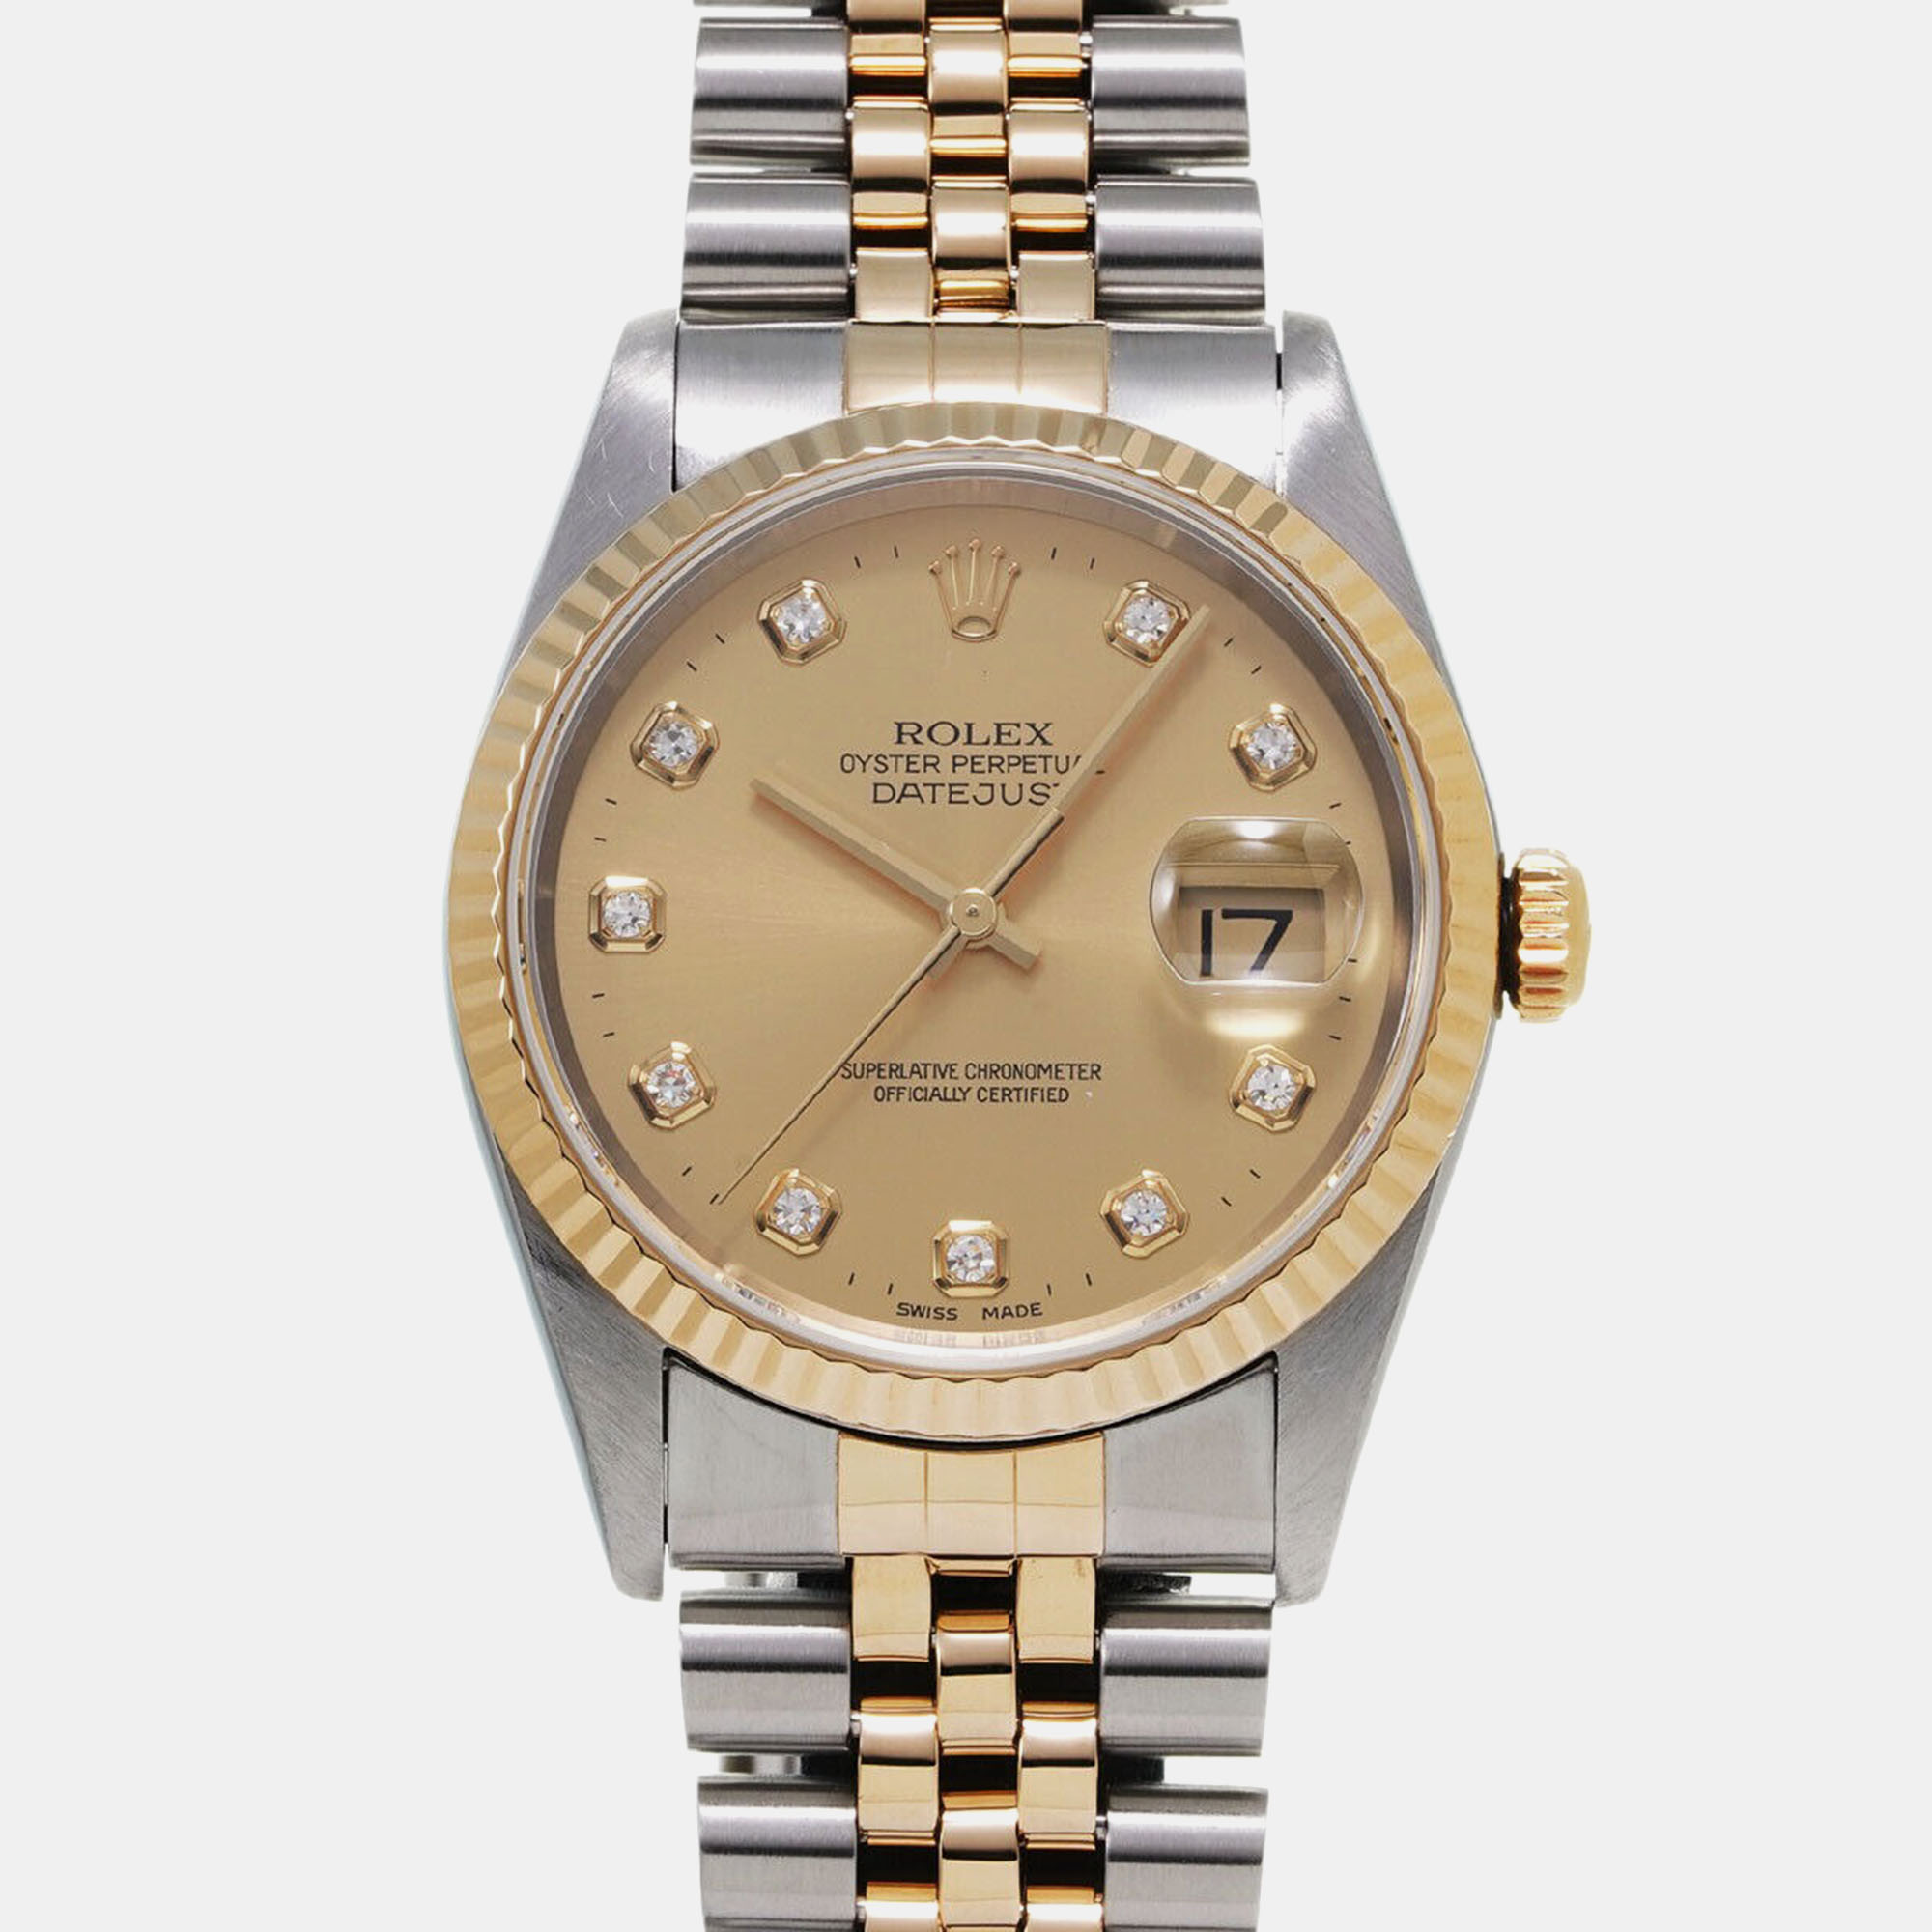 Rolex champagne diamond 18k yellow gold stainless steel datejust 16233 automatic men's wristwatch 36 mm